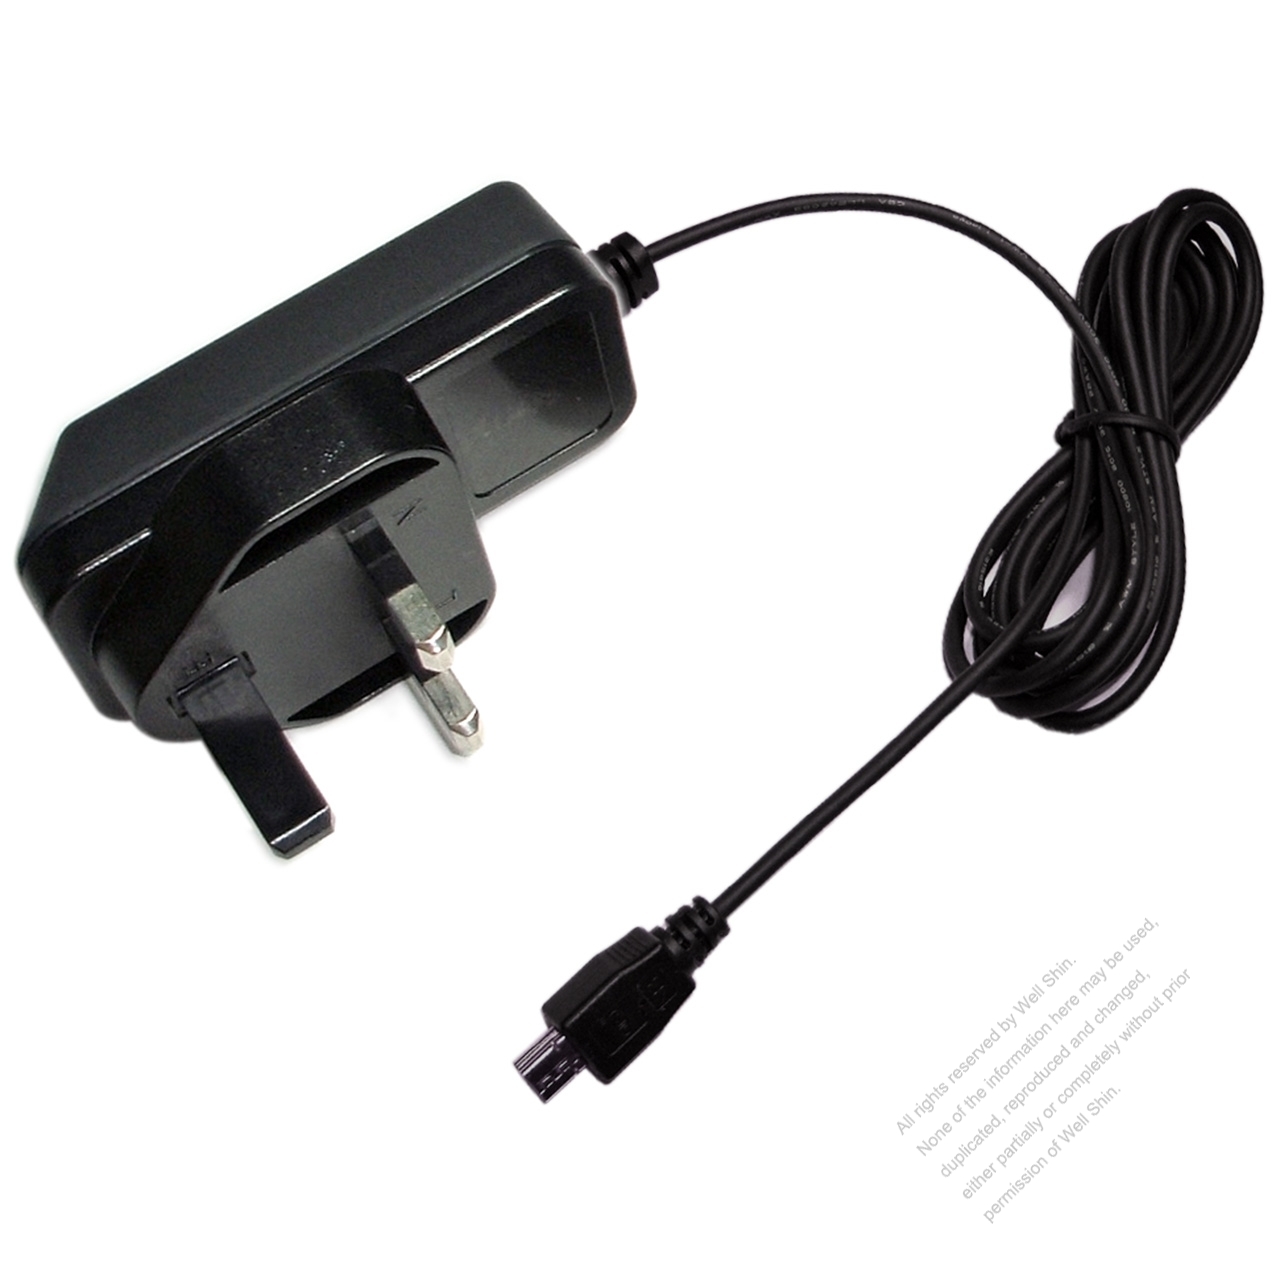 5V Volt Power Supply 3 Pin 2A UK Plug Charger AC/DC Adapter Black